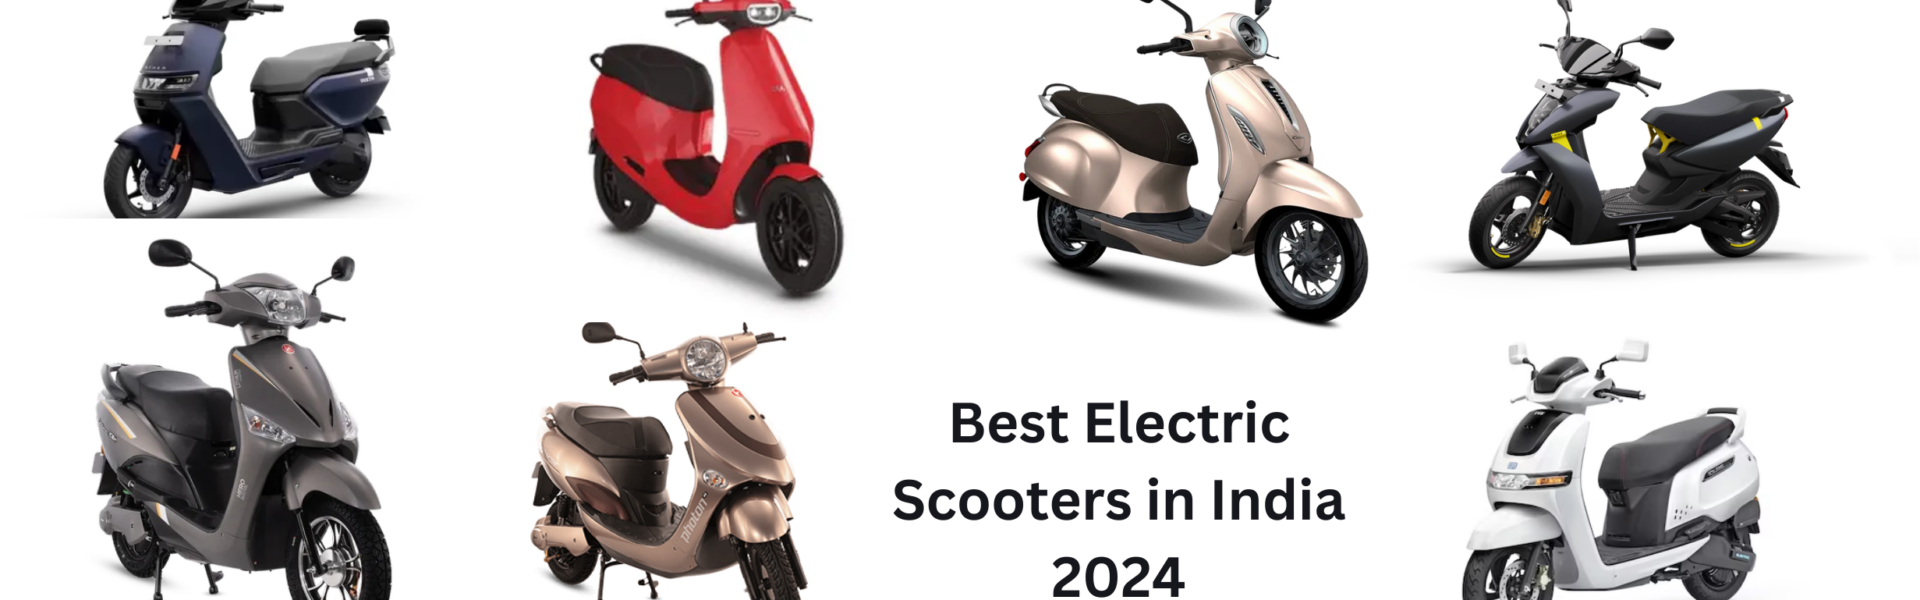 Best electric scooters in India in 2024